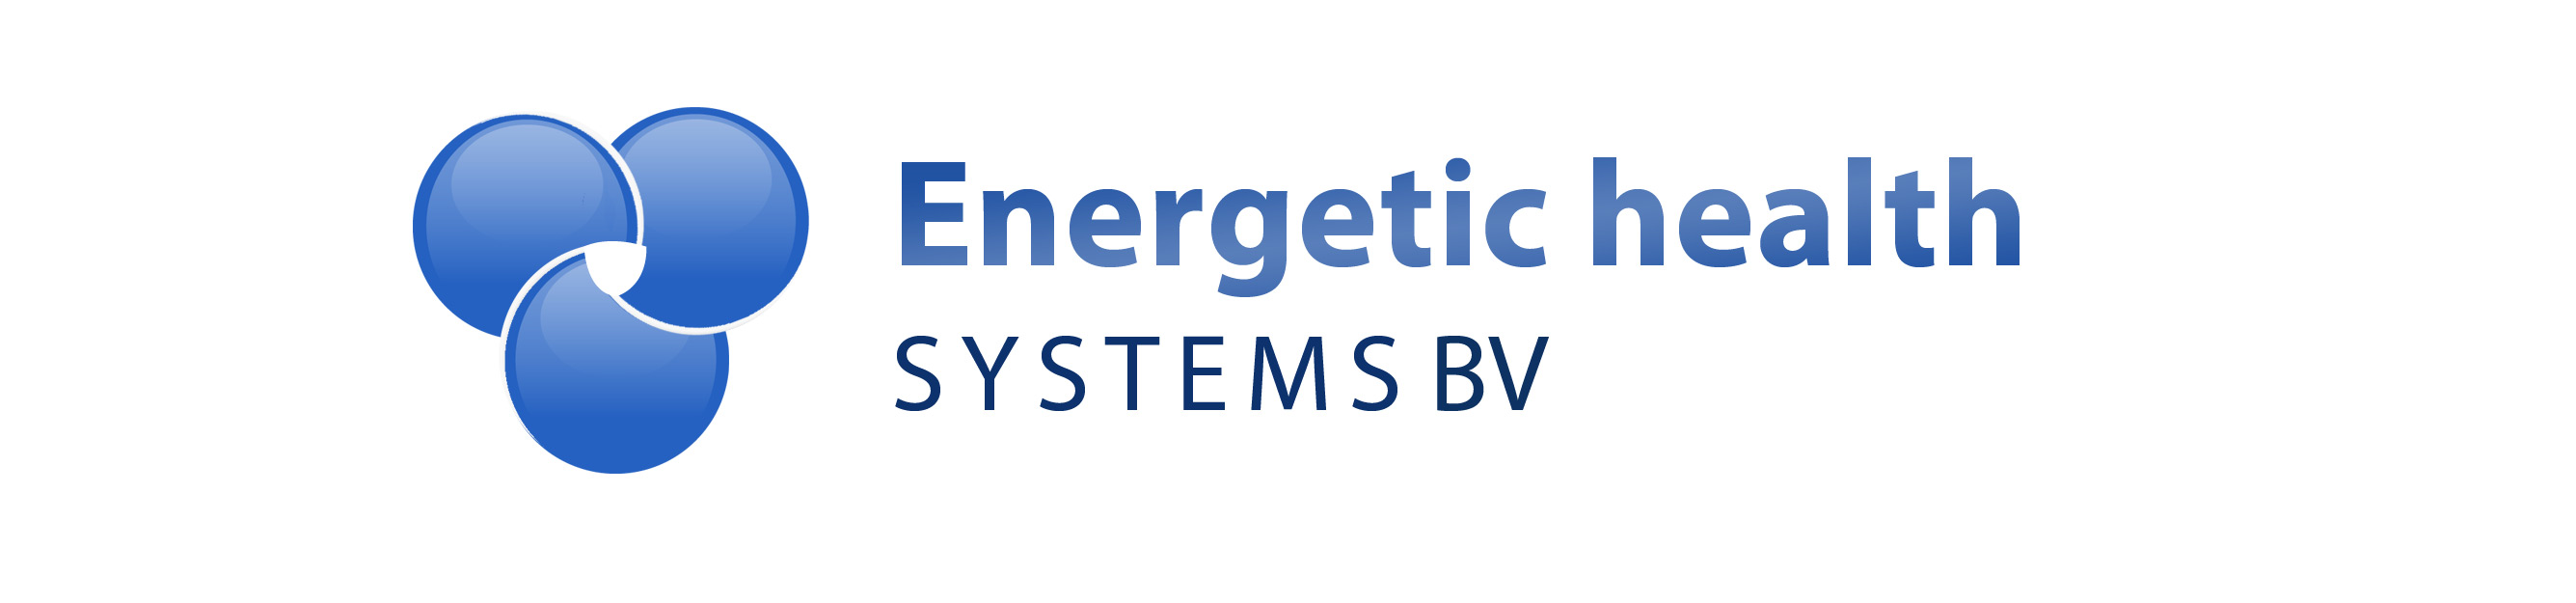 energetic health systems